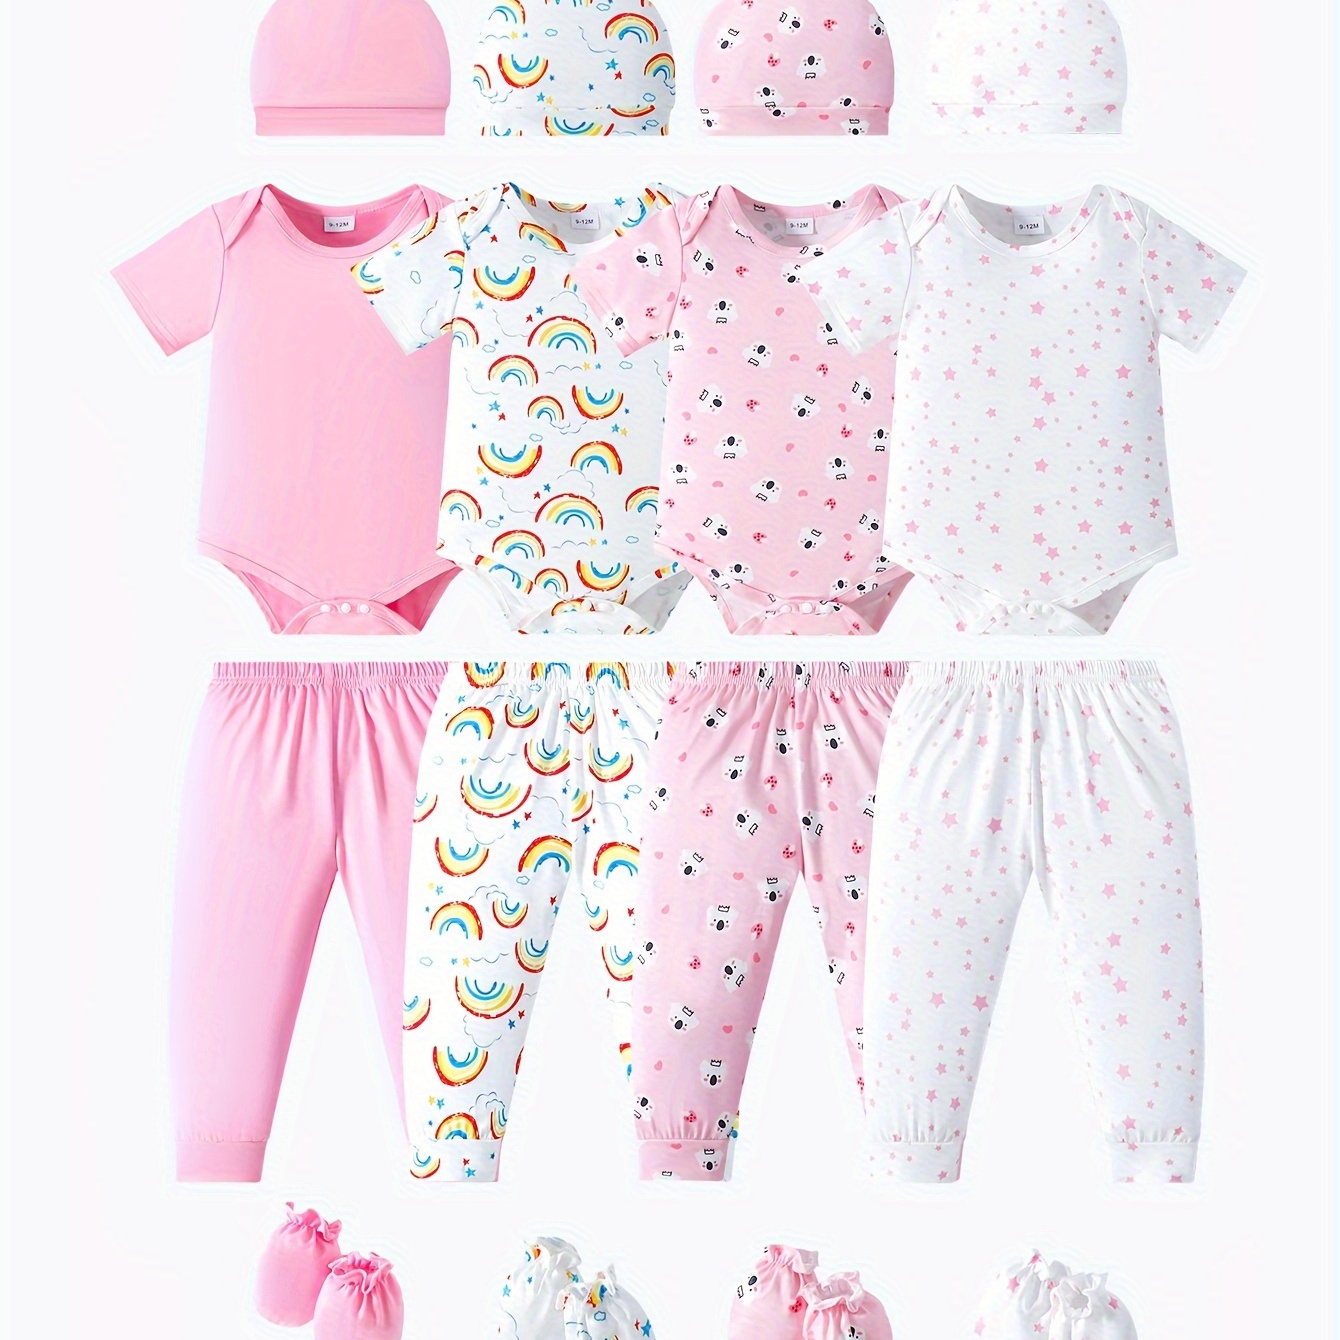 

4 Sets Of Newborn Baby Clothes Outfits, Solid Color & Rainbow & Stars & Cartoon Print 16pcs Outfits Gifts - 4pcs Toddler's Rompers + 4 Pairs Of Pants + 4 Hats + 4 Pairs Of Gloves Sets